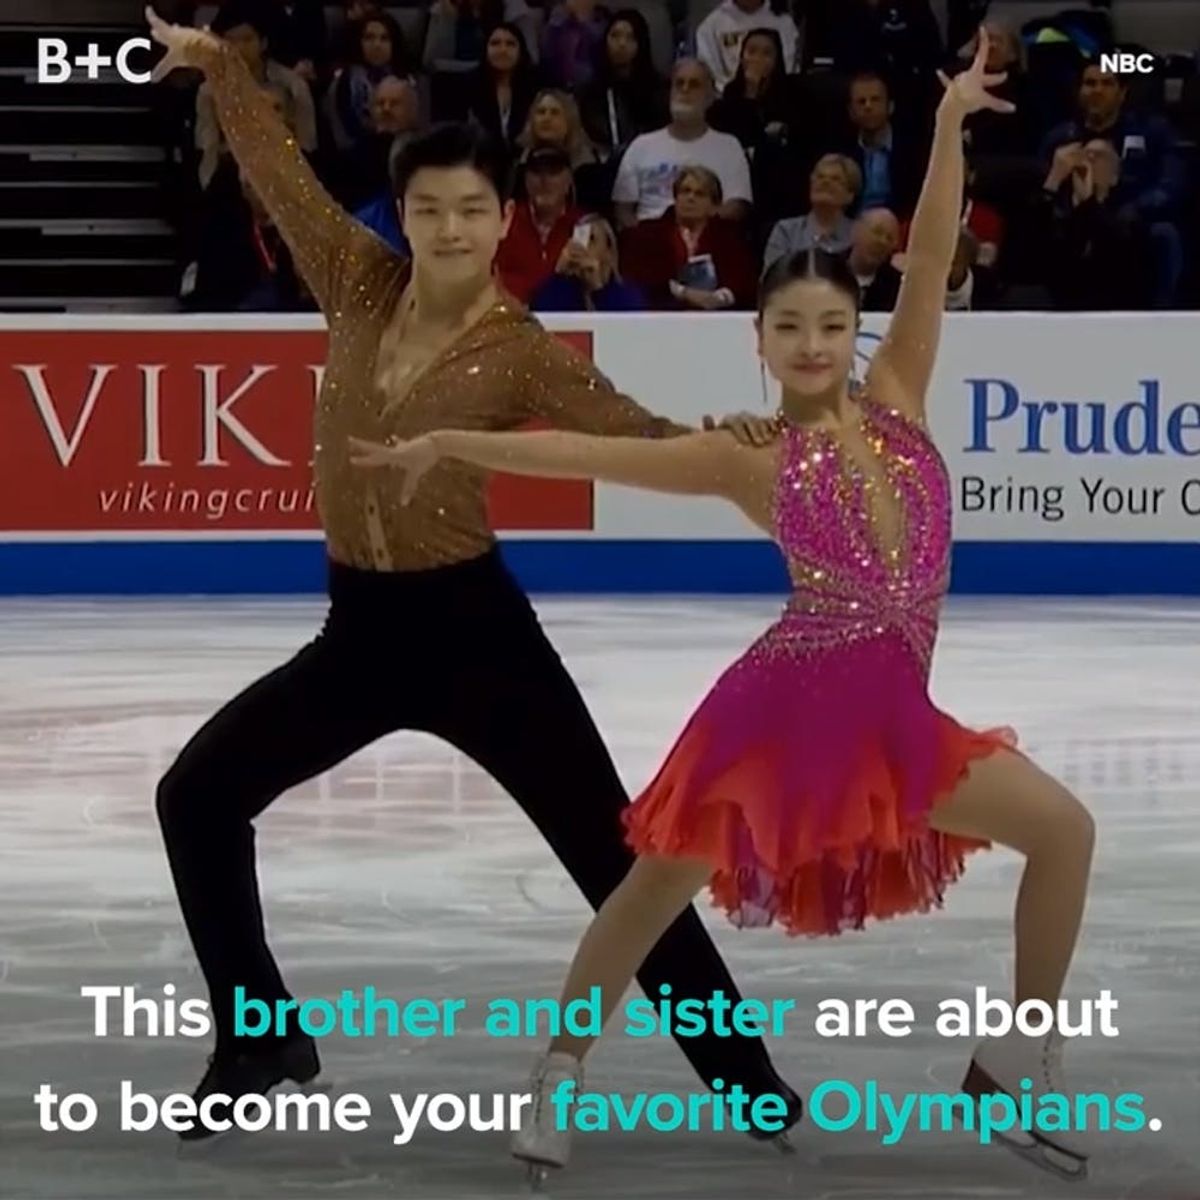 Why You Should Root For the Shibutani Siblings At the Olympics